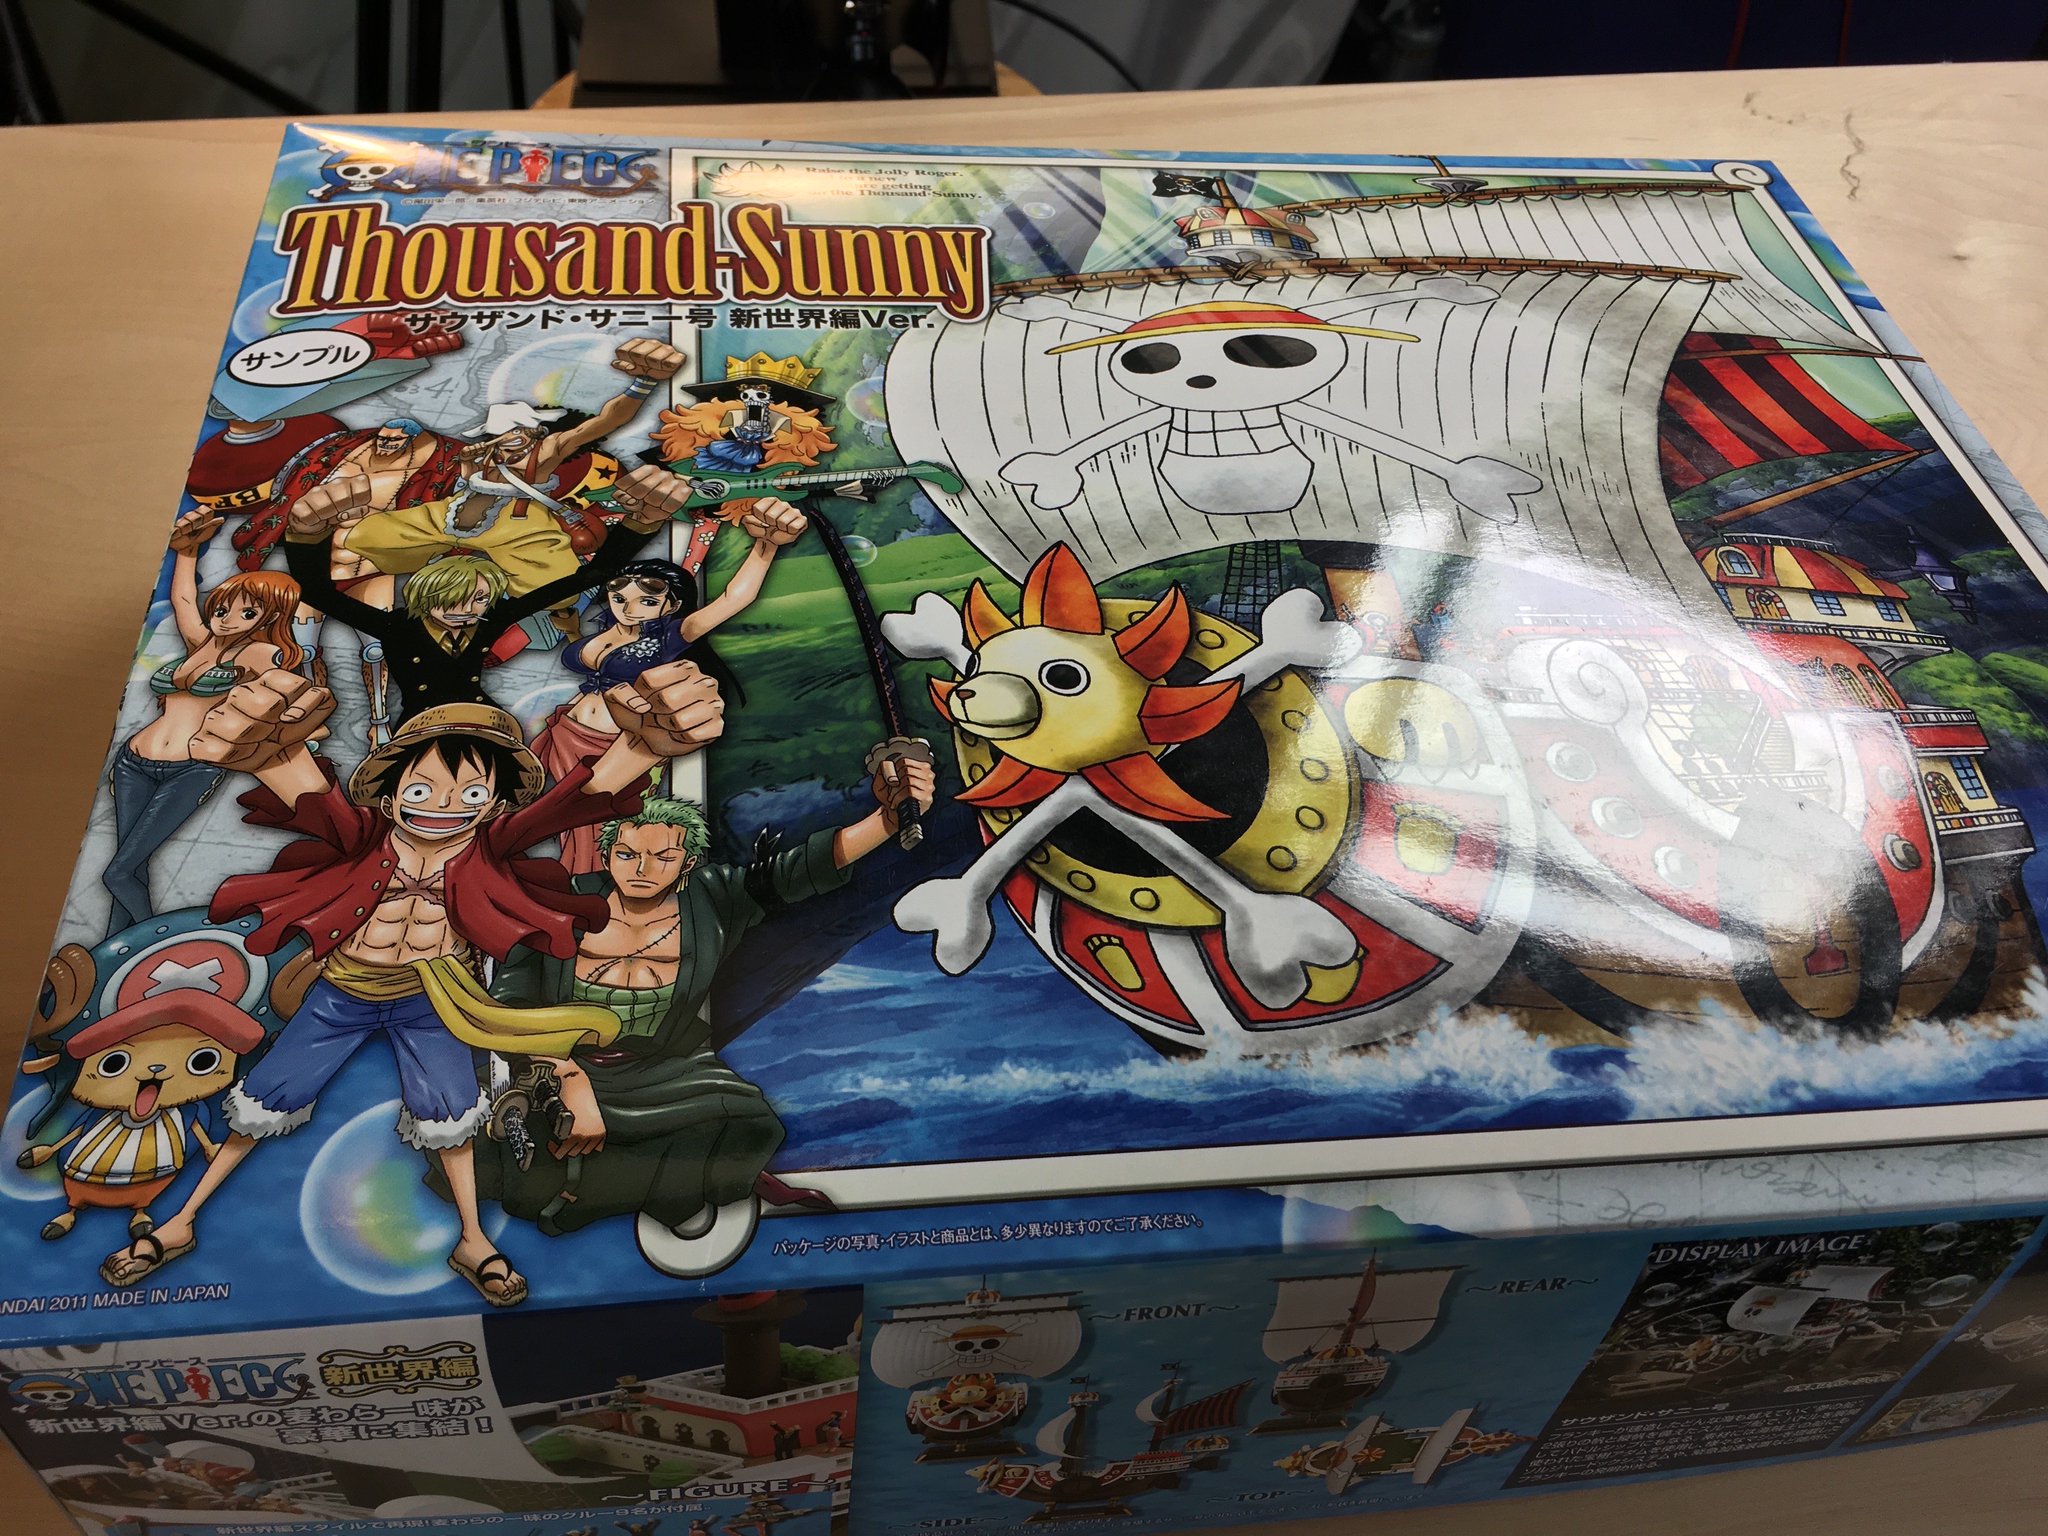 Funimation We Re Building A Model Of The Onepiece Thousand Sunny Live Today And Diving Into Discussion About The Show 6pm Ct T Co 6laizt1mwi T Co Oinsupk3vd T Co 5kq4cy3osq T Co Fgkfjtpp5j